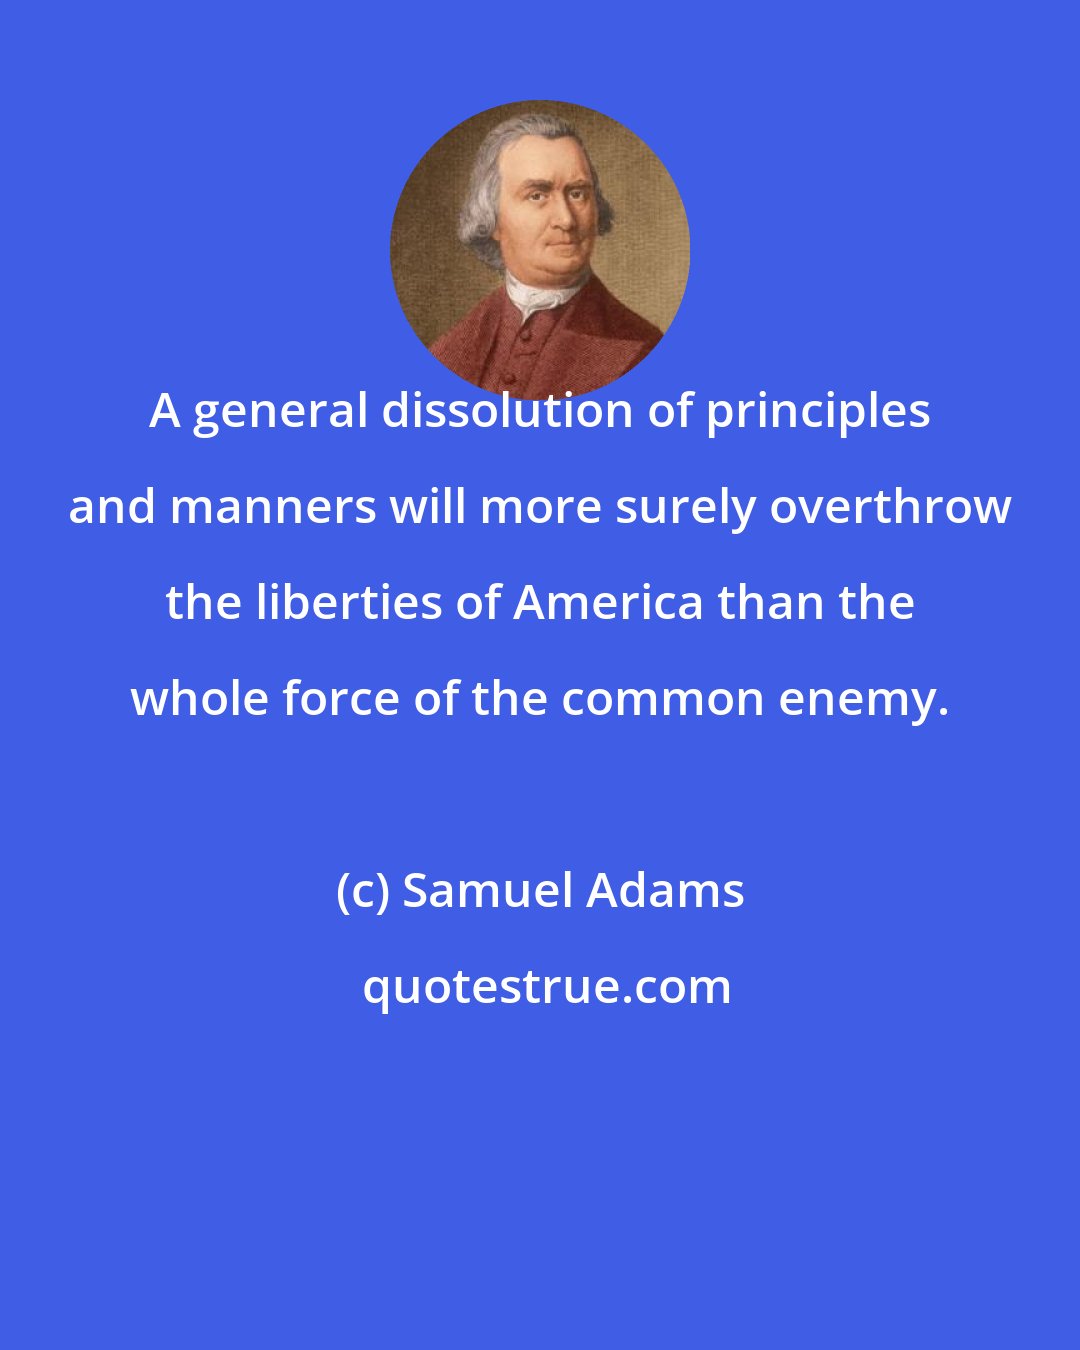 Samuel Adams: A general dissolution of principles and manners will more surely overthrow the liberties of America than the whole force of the common enemy.